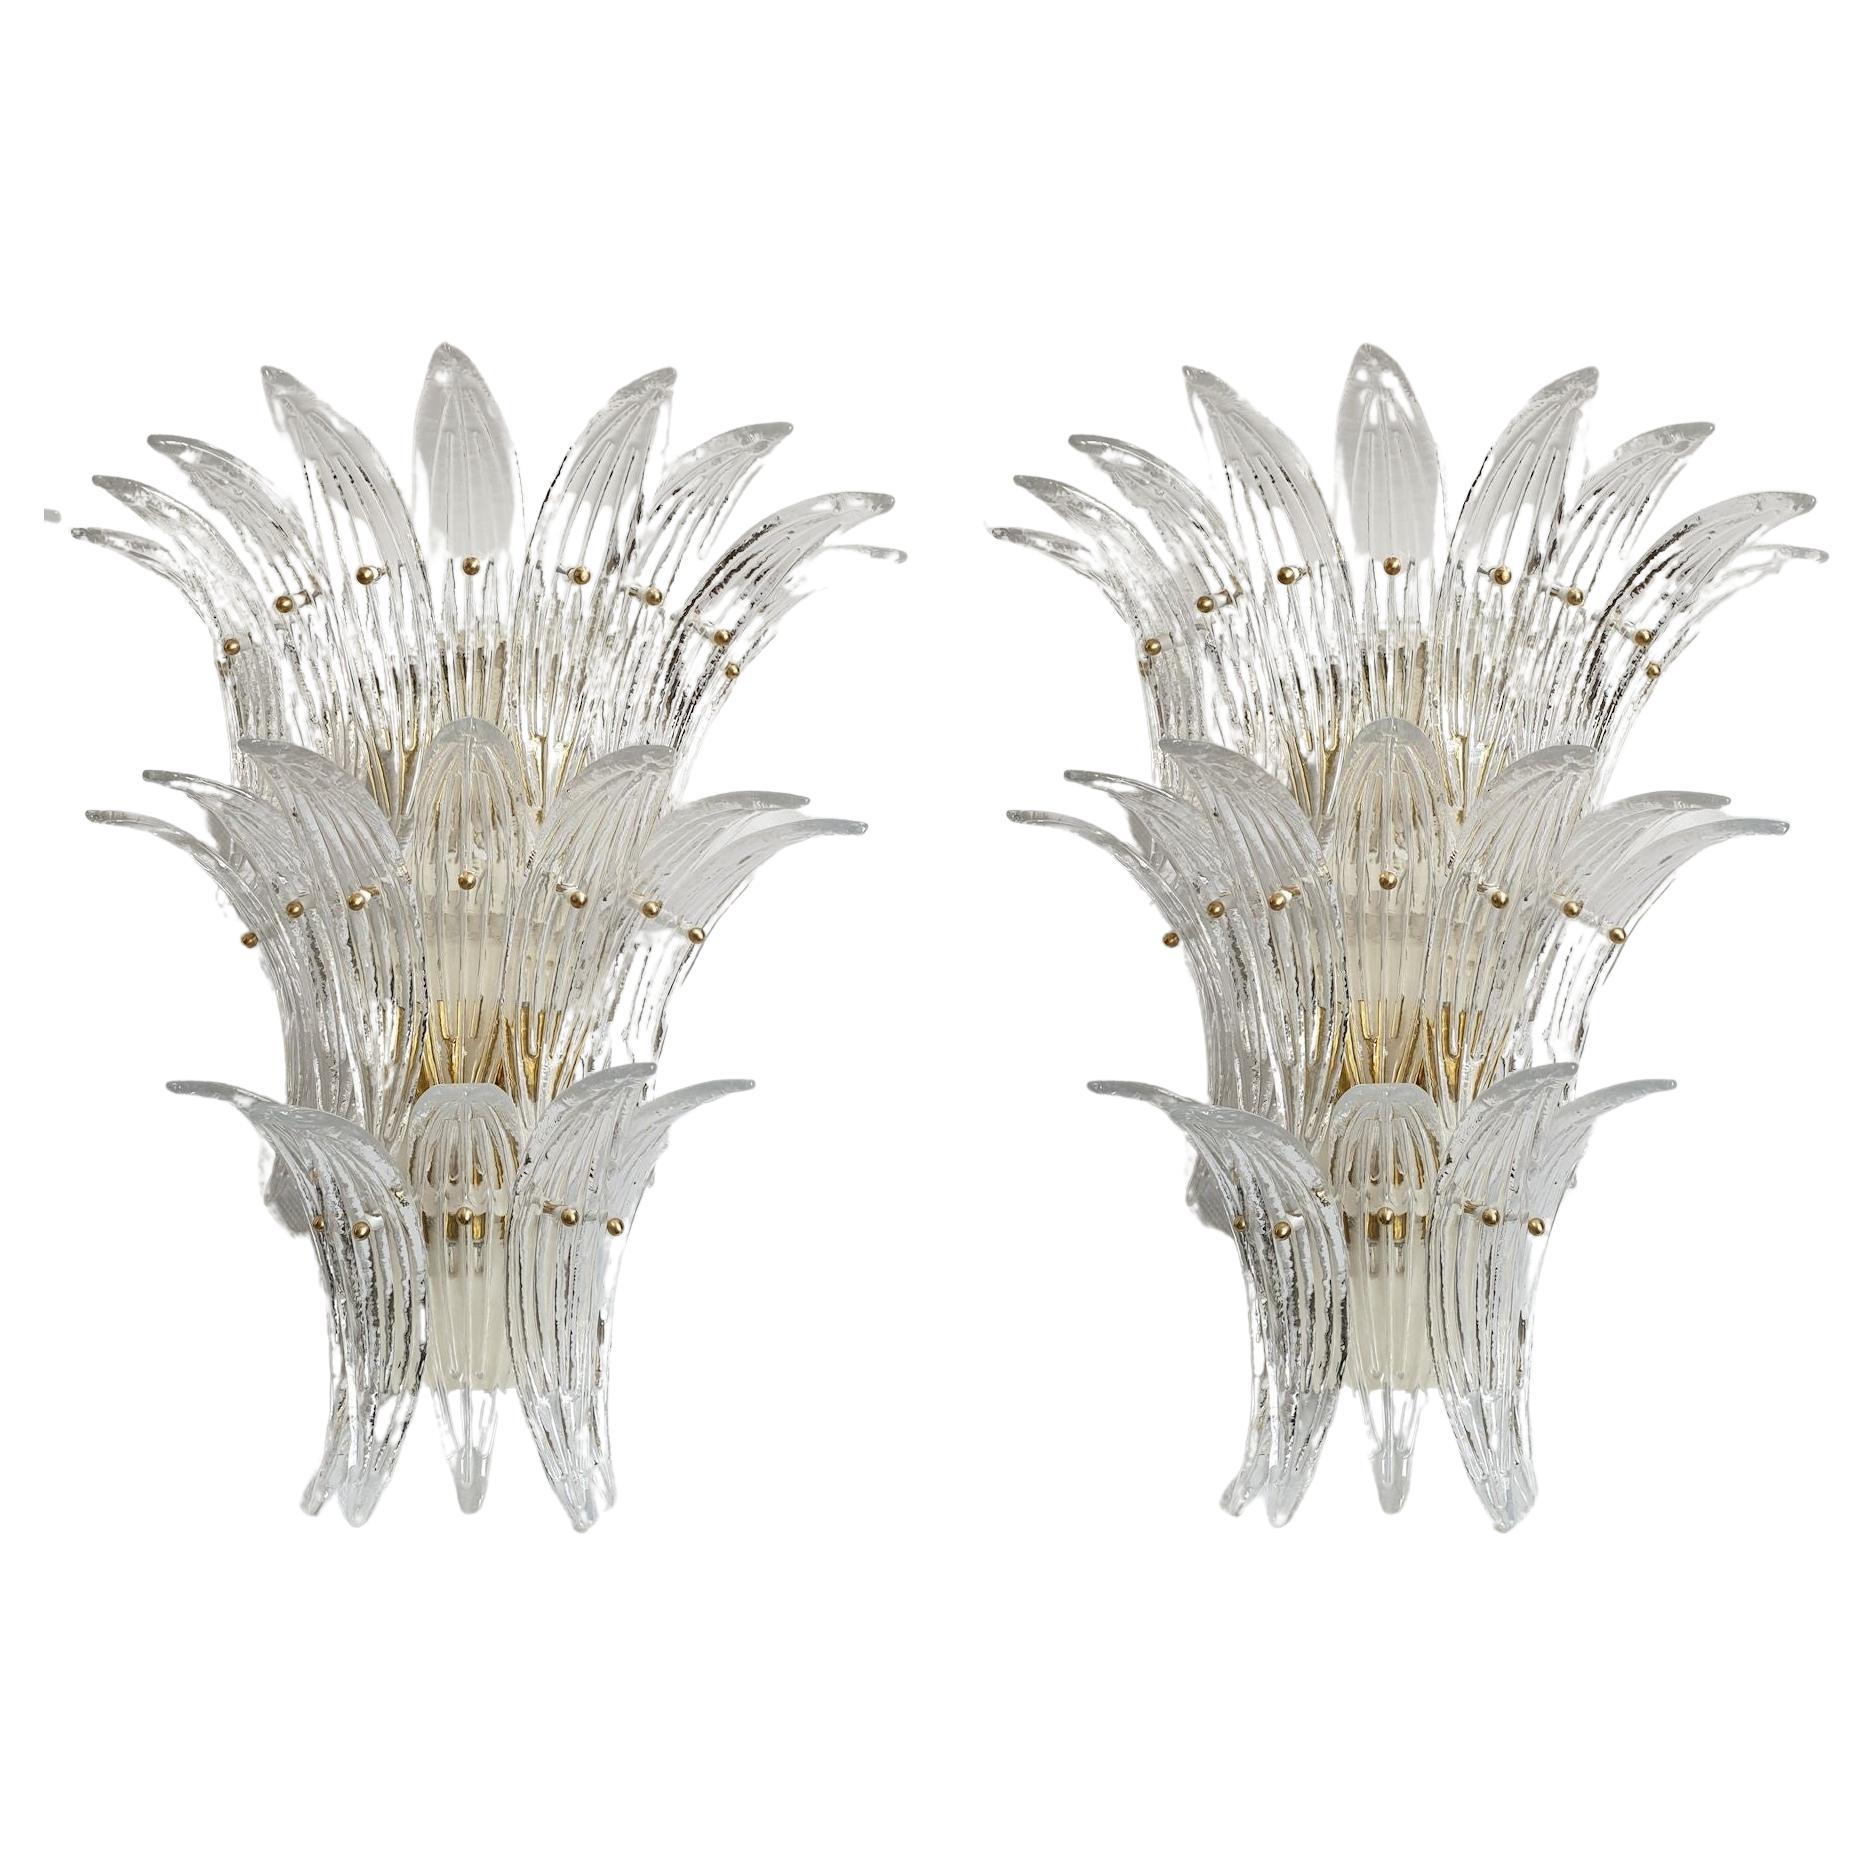 Large Mid Century Modern Clear Murano Glass Palmette Sconces, a Pair